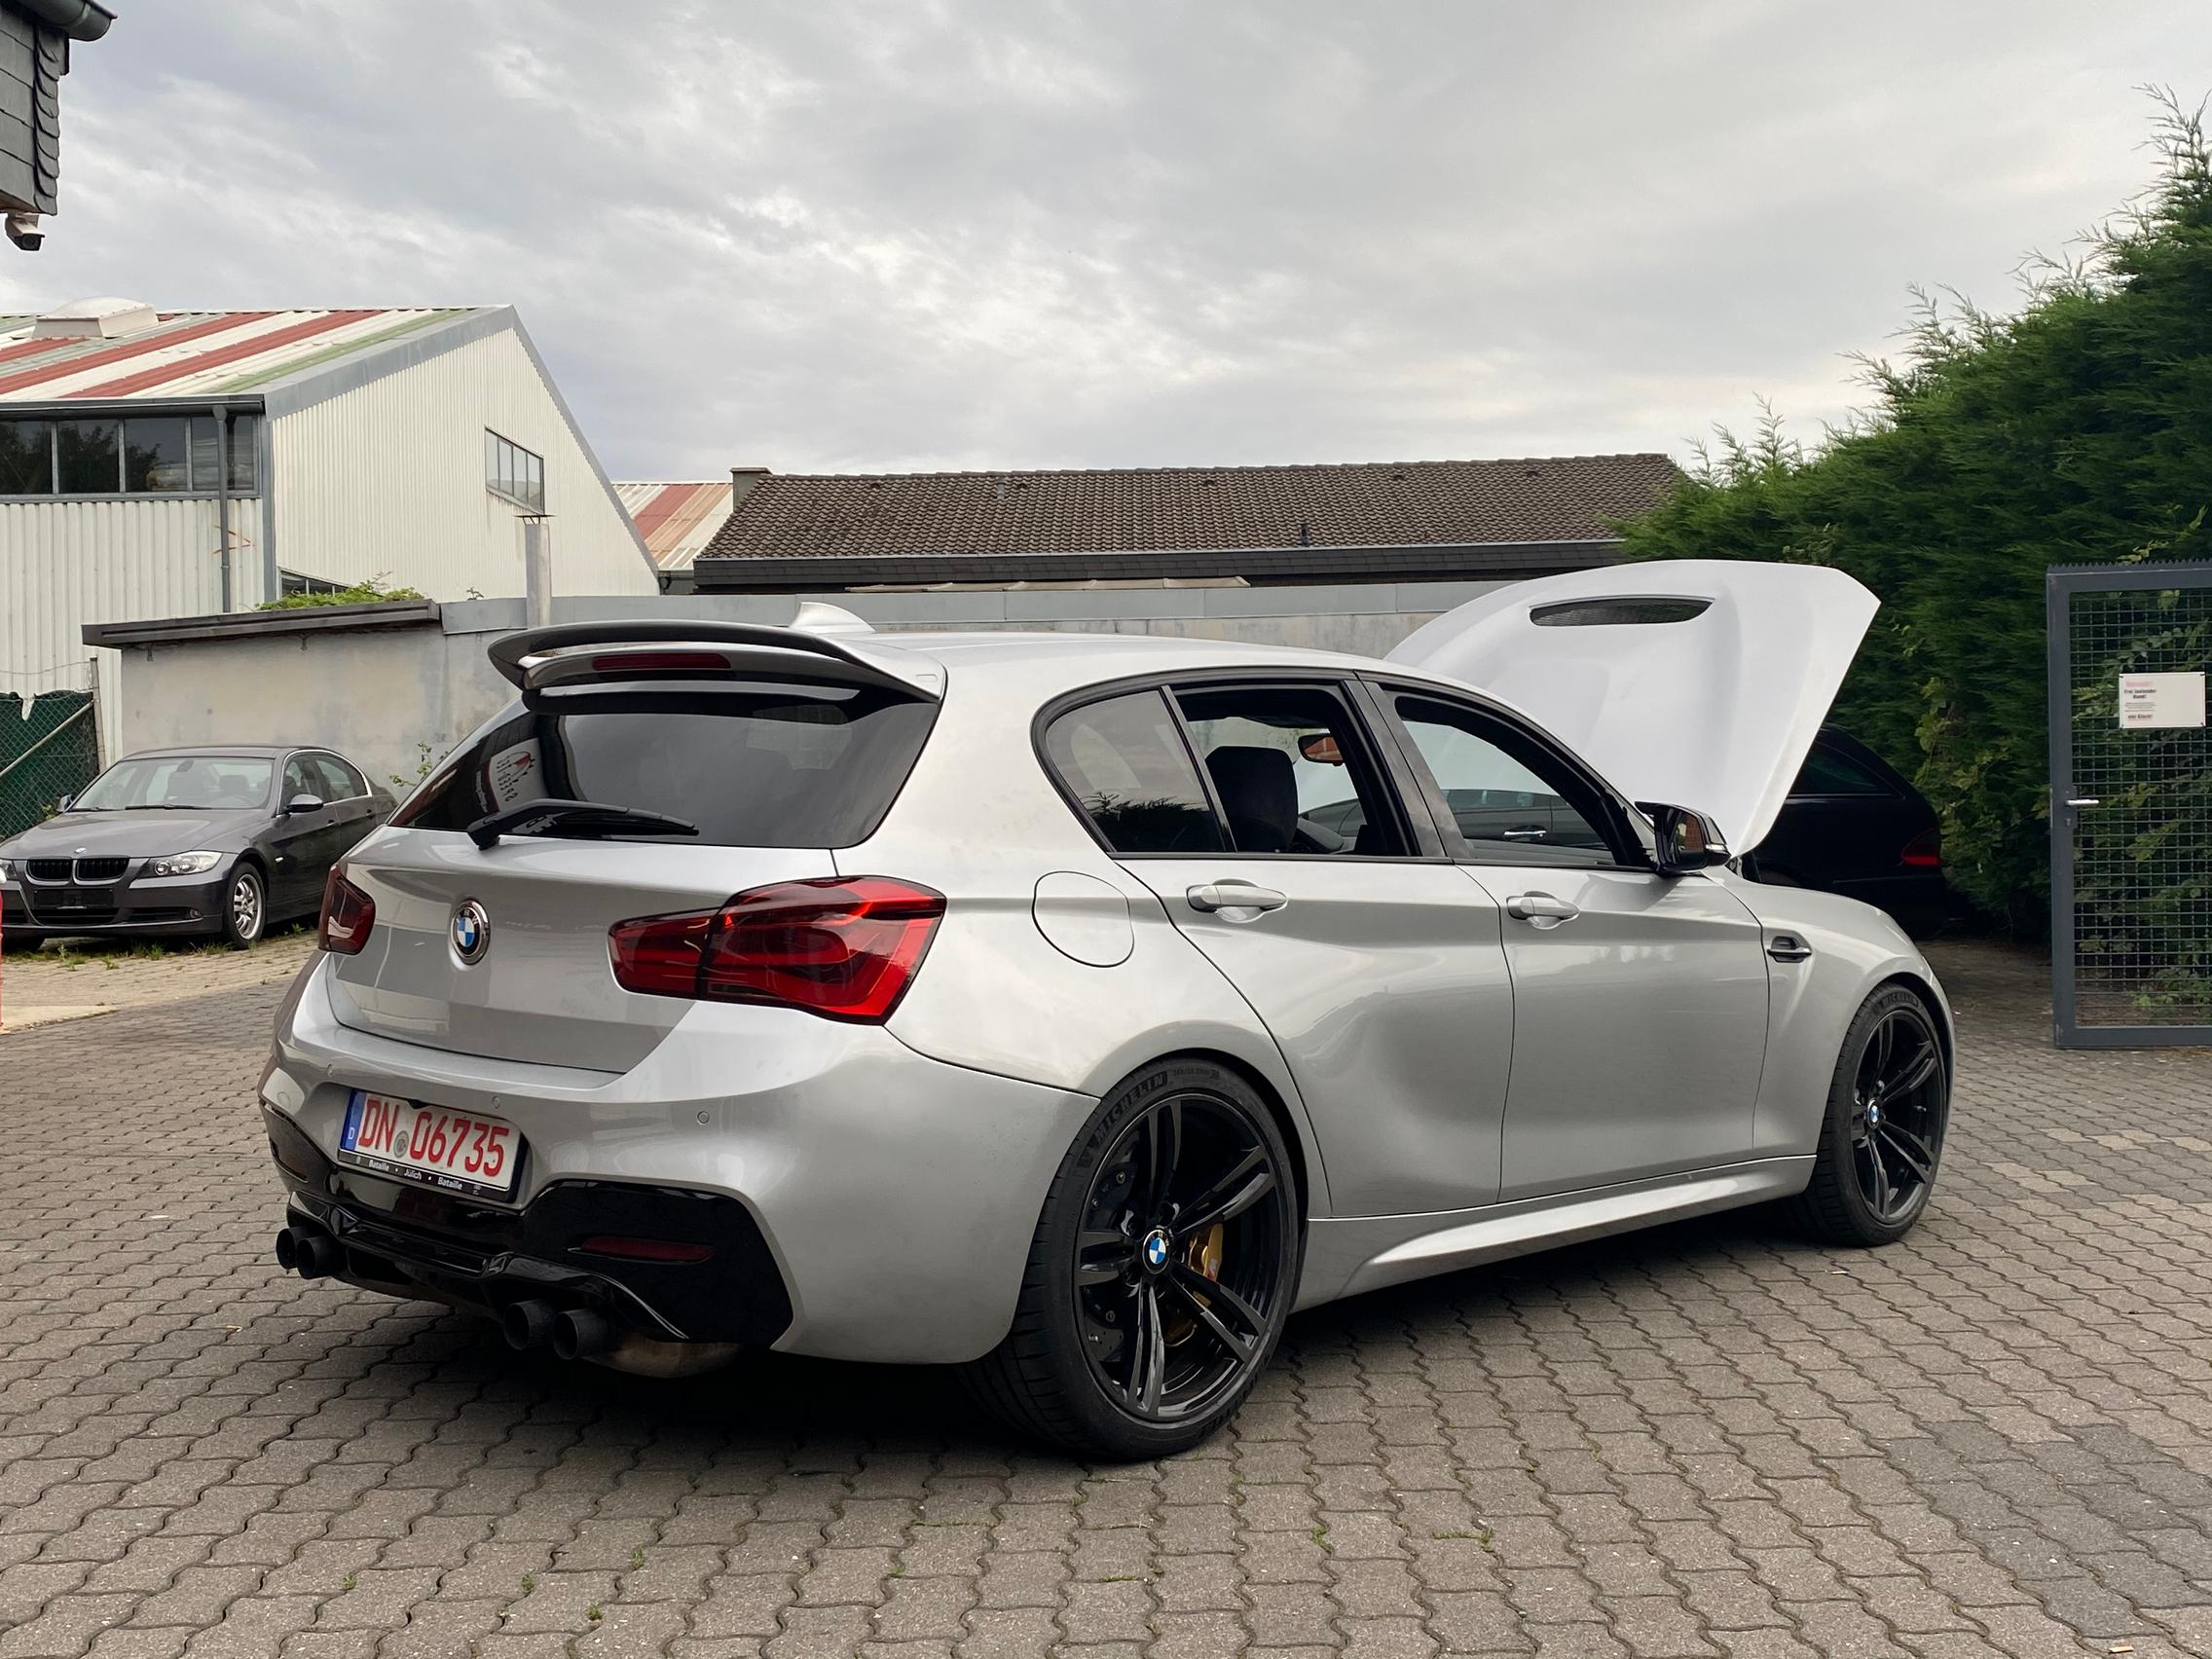 Exon Gloss Black M2 Competition Style Rear Diffuser w. Quad Outlet for BMW 1-Series M135i LCI & M140i F20 M-Sport - MODE Auto Concepts